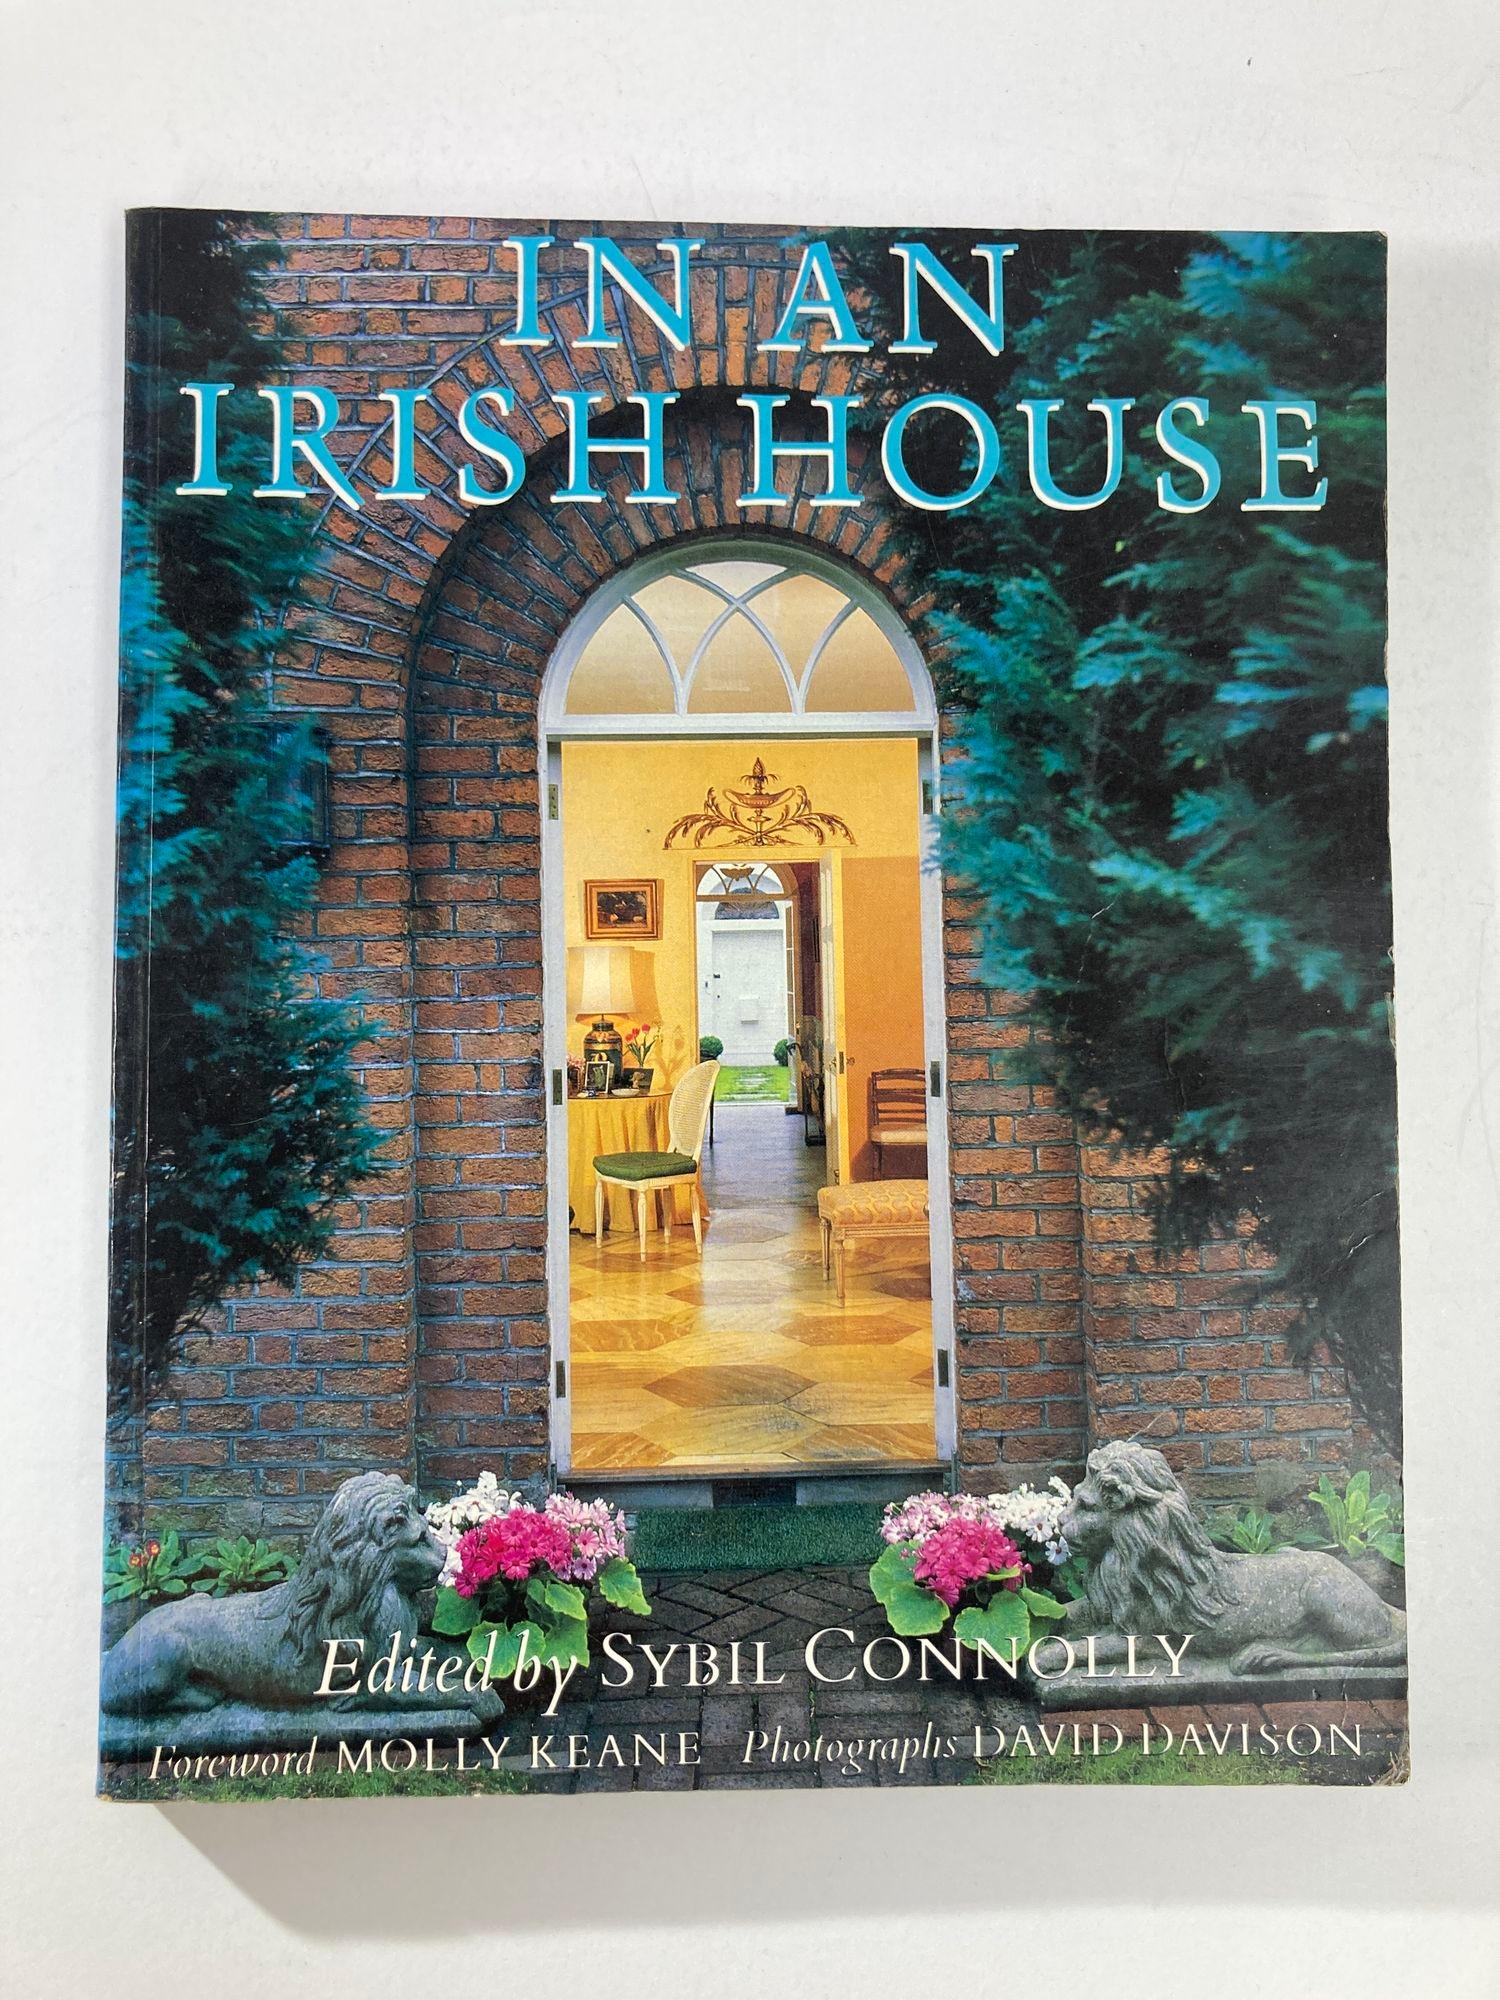 In an Irish House soft cover book. 1st Edition 1988.
Taking readers on a guided tour of the stately manor houses and romantic cottages of Ireland, shows and describes castles, mansions, townhouses, and cottages in Ireland, and briefly looks at the